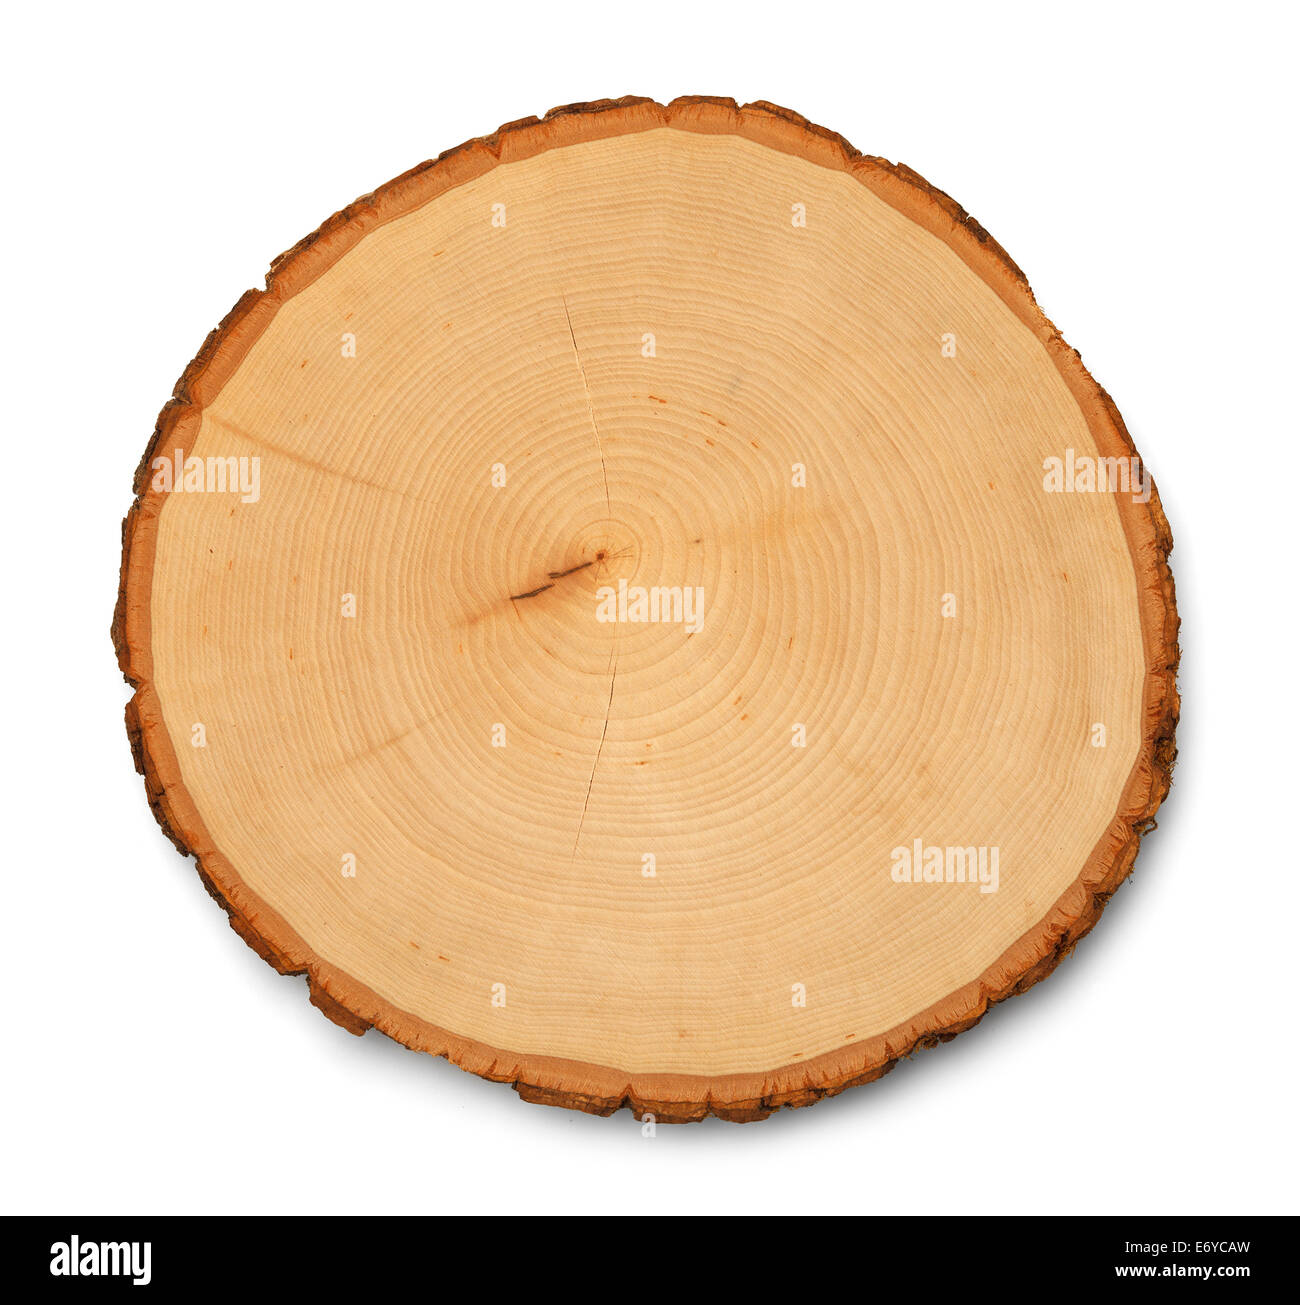 Tree Rings Cross Section and Texture Isolated on White Background. Stock Photo